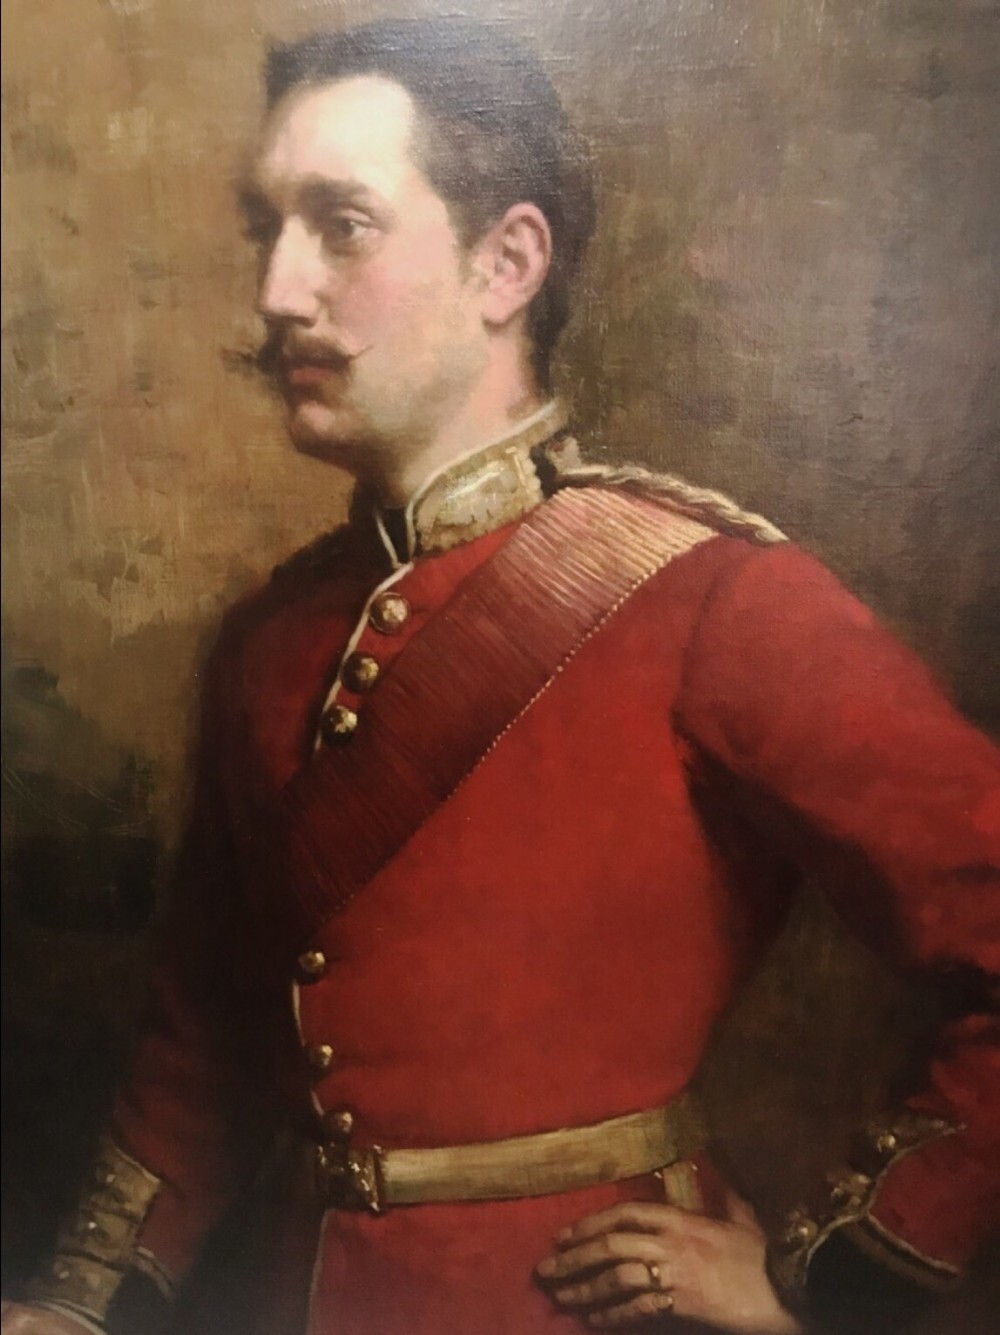 scots guards officer by william carter brother howard carter discovered tutankhamun's tomb 19thc military oil portrait painting